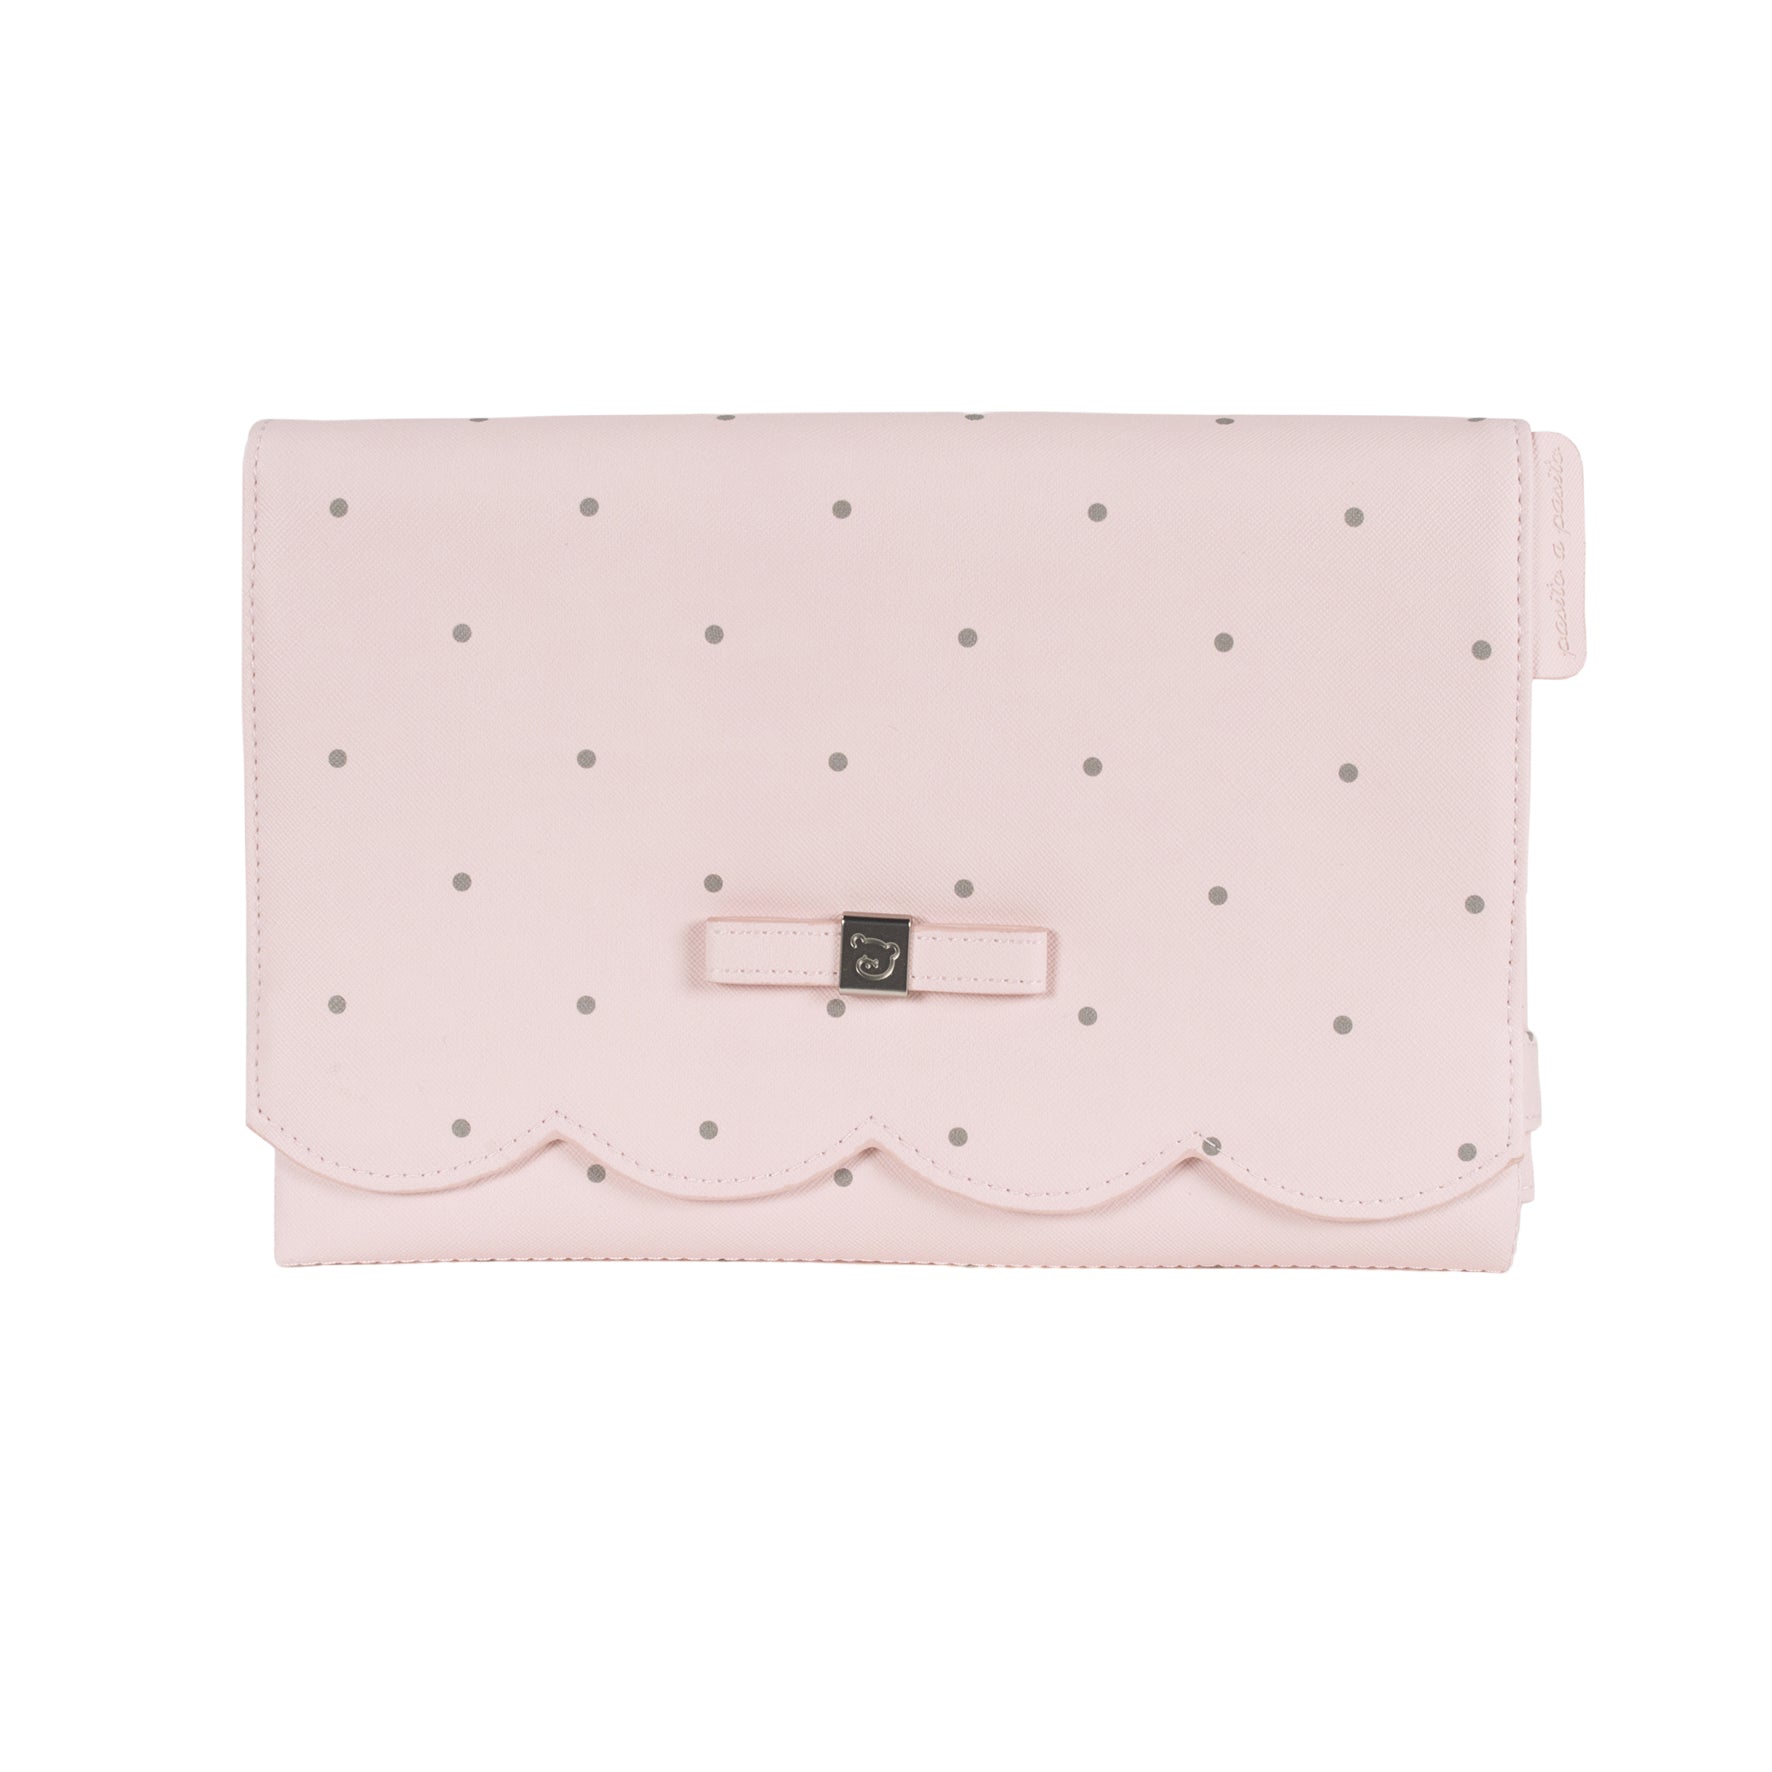 Pasito a Pasito Chelsea Pink Travel Changing Mat